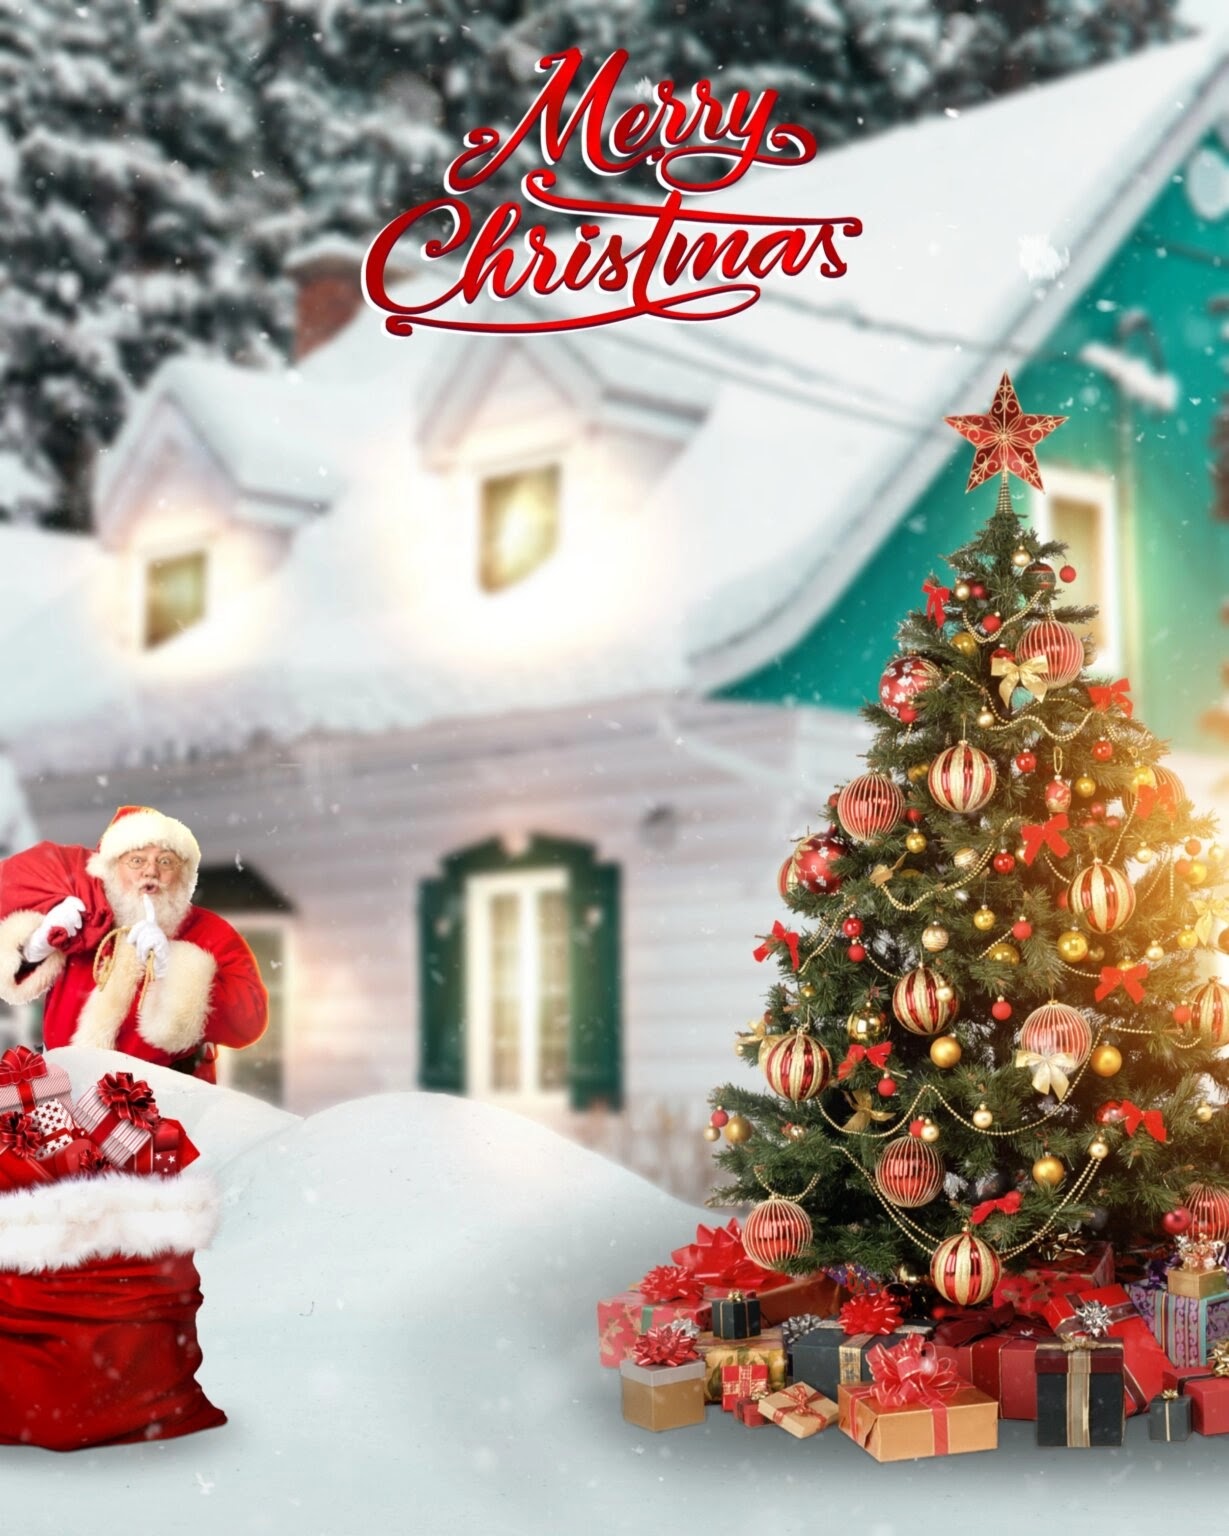 500+ Happy Merry Christmas Editing Background Images Hd for PicsArt 2021-22